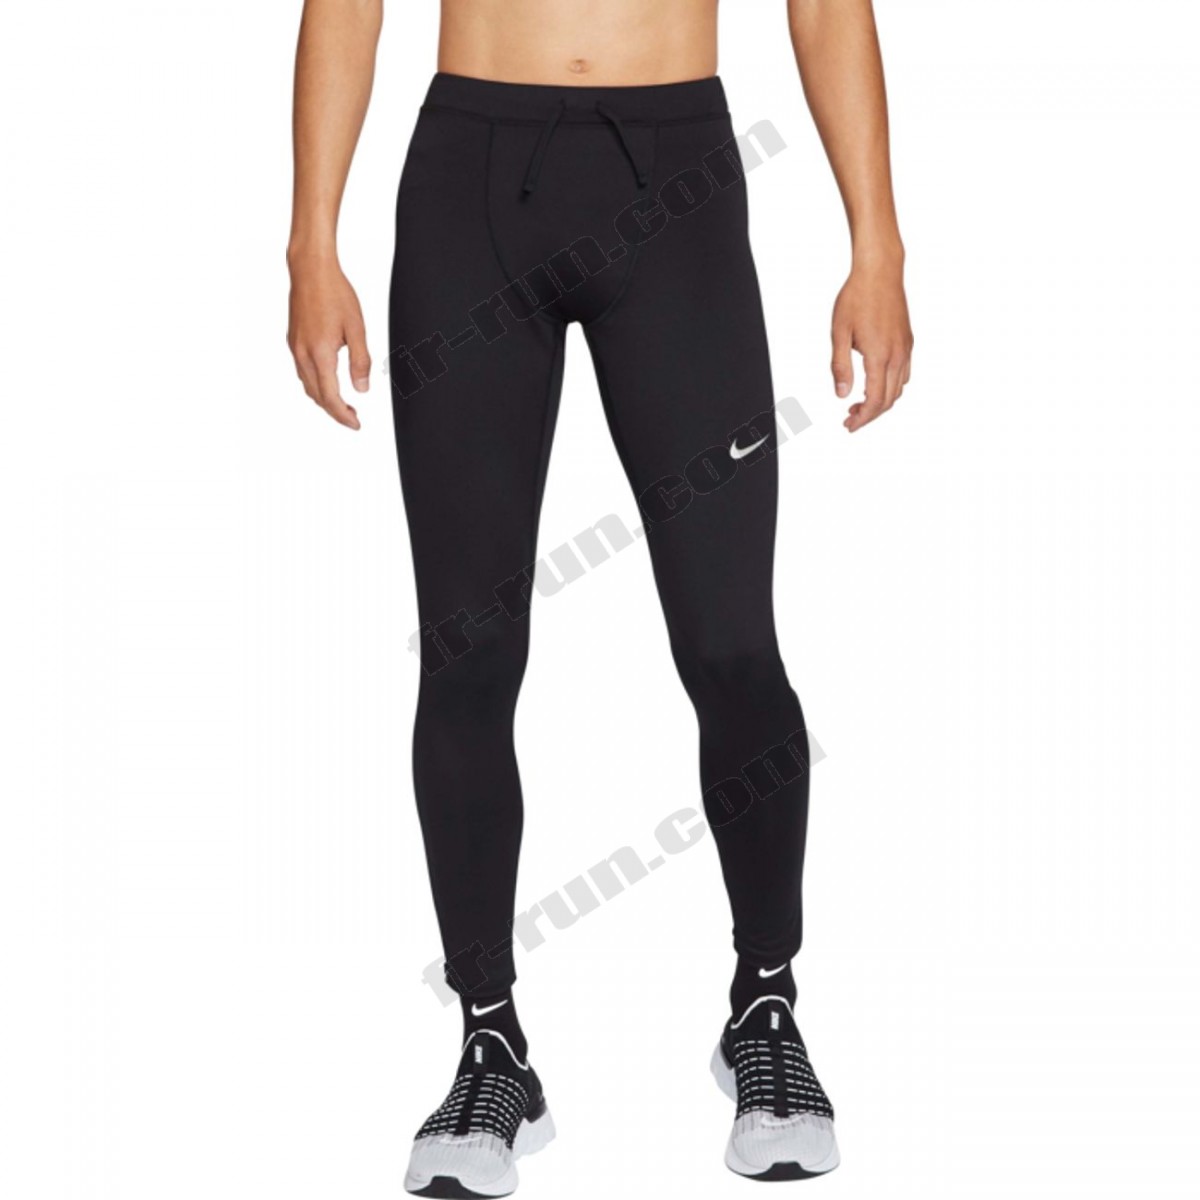 Nike/LEGGING running homme NIKE DF CHLLGR √ Nouveau style √ Soldes - -2